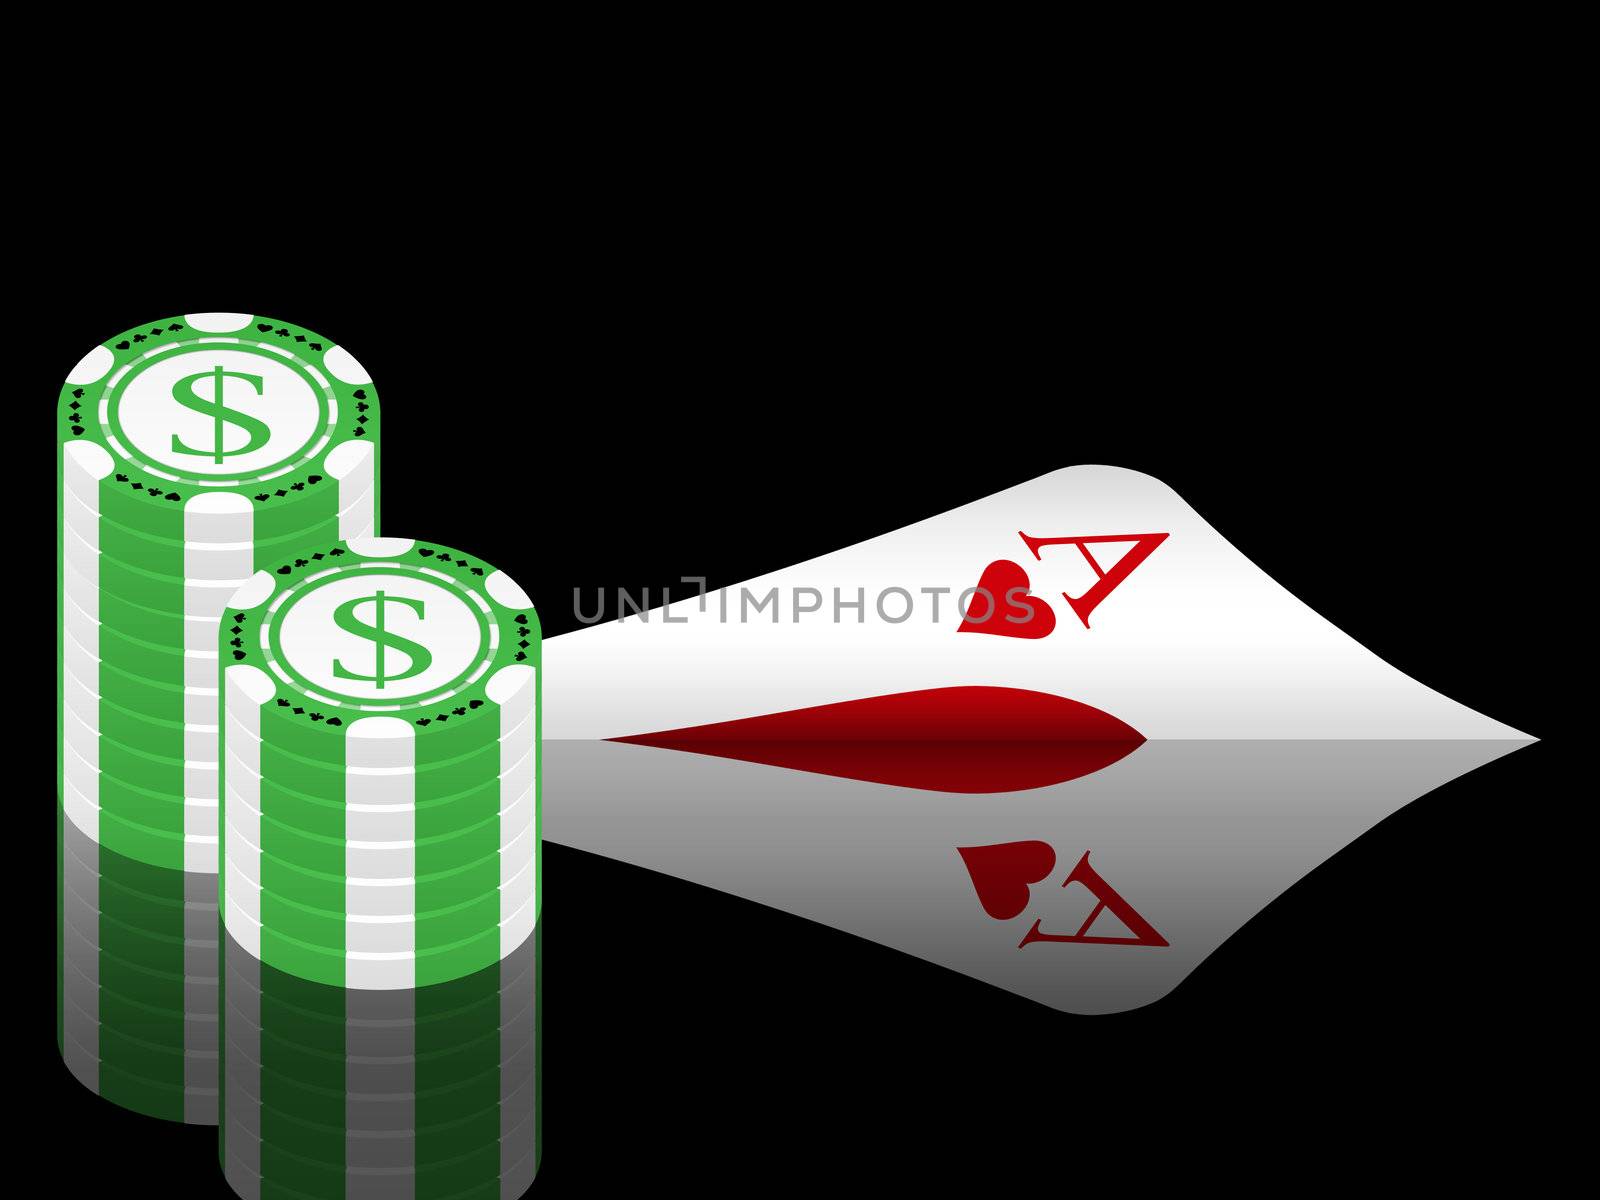 aces and chips in game poker on the casino table
